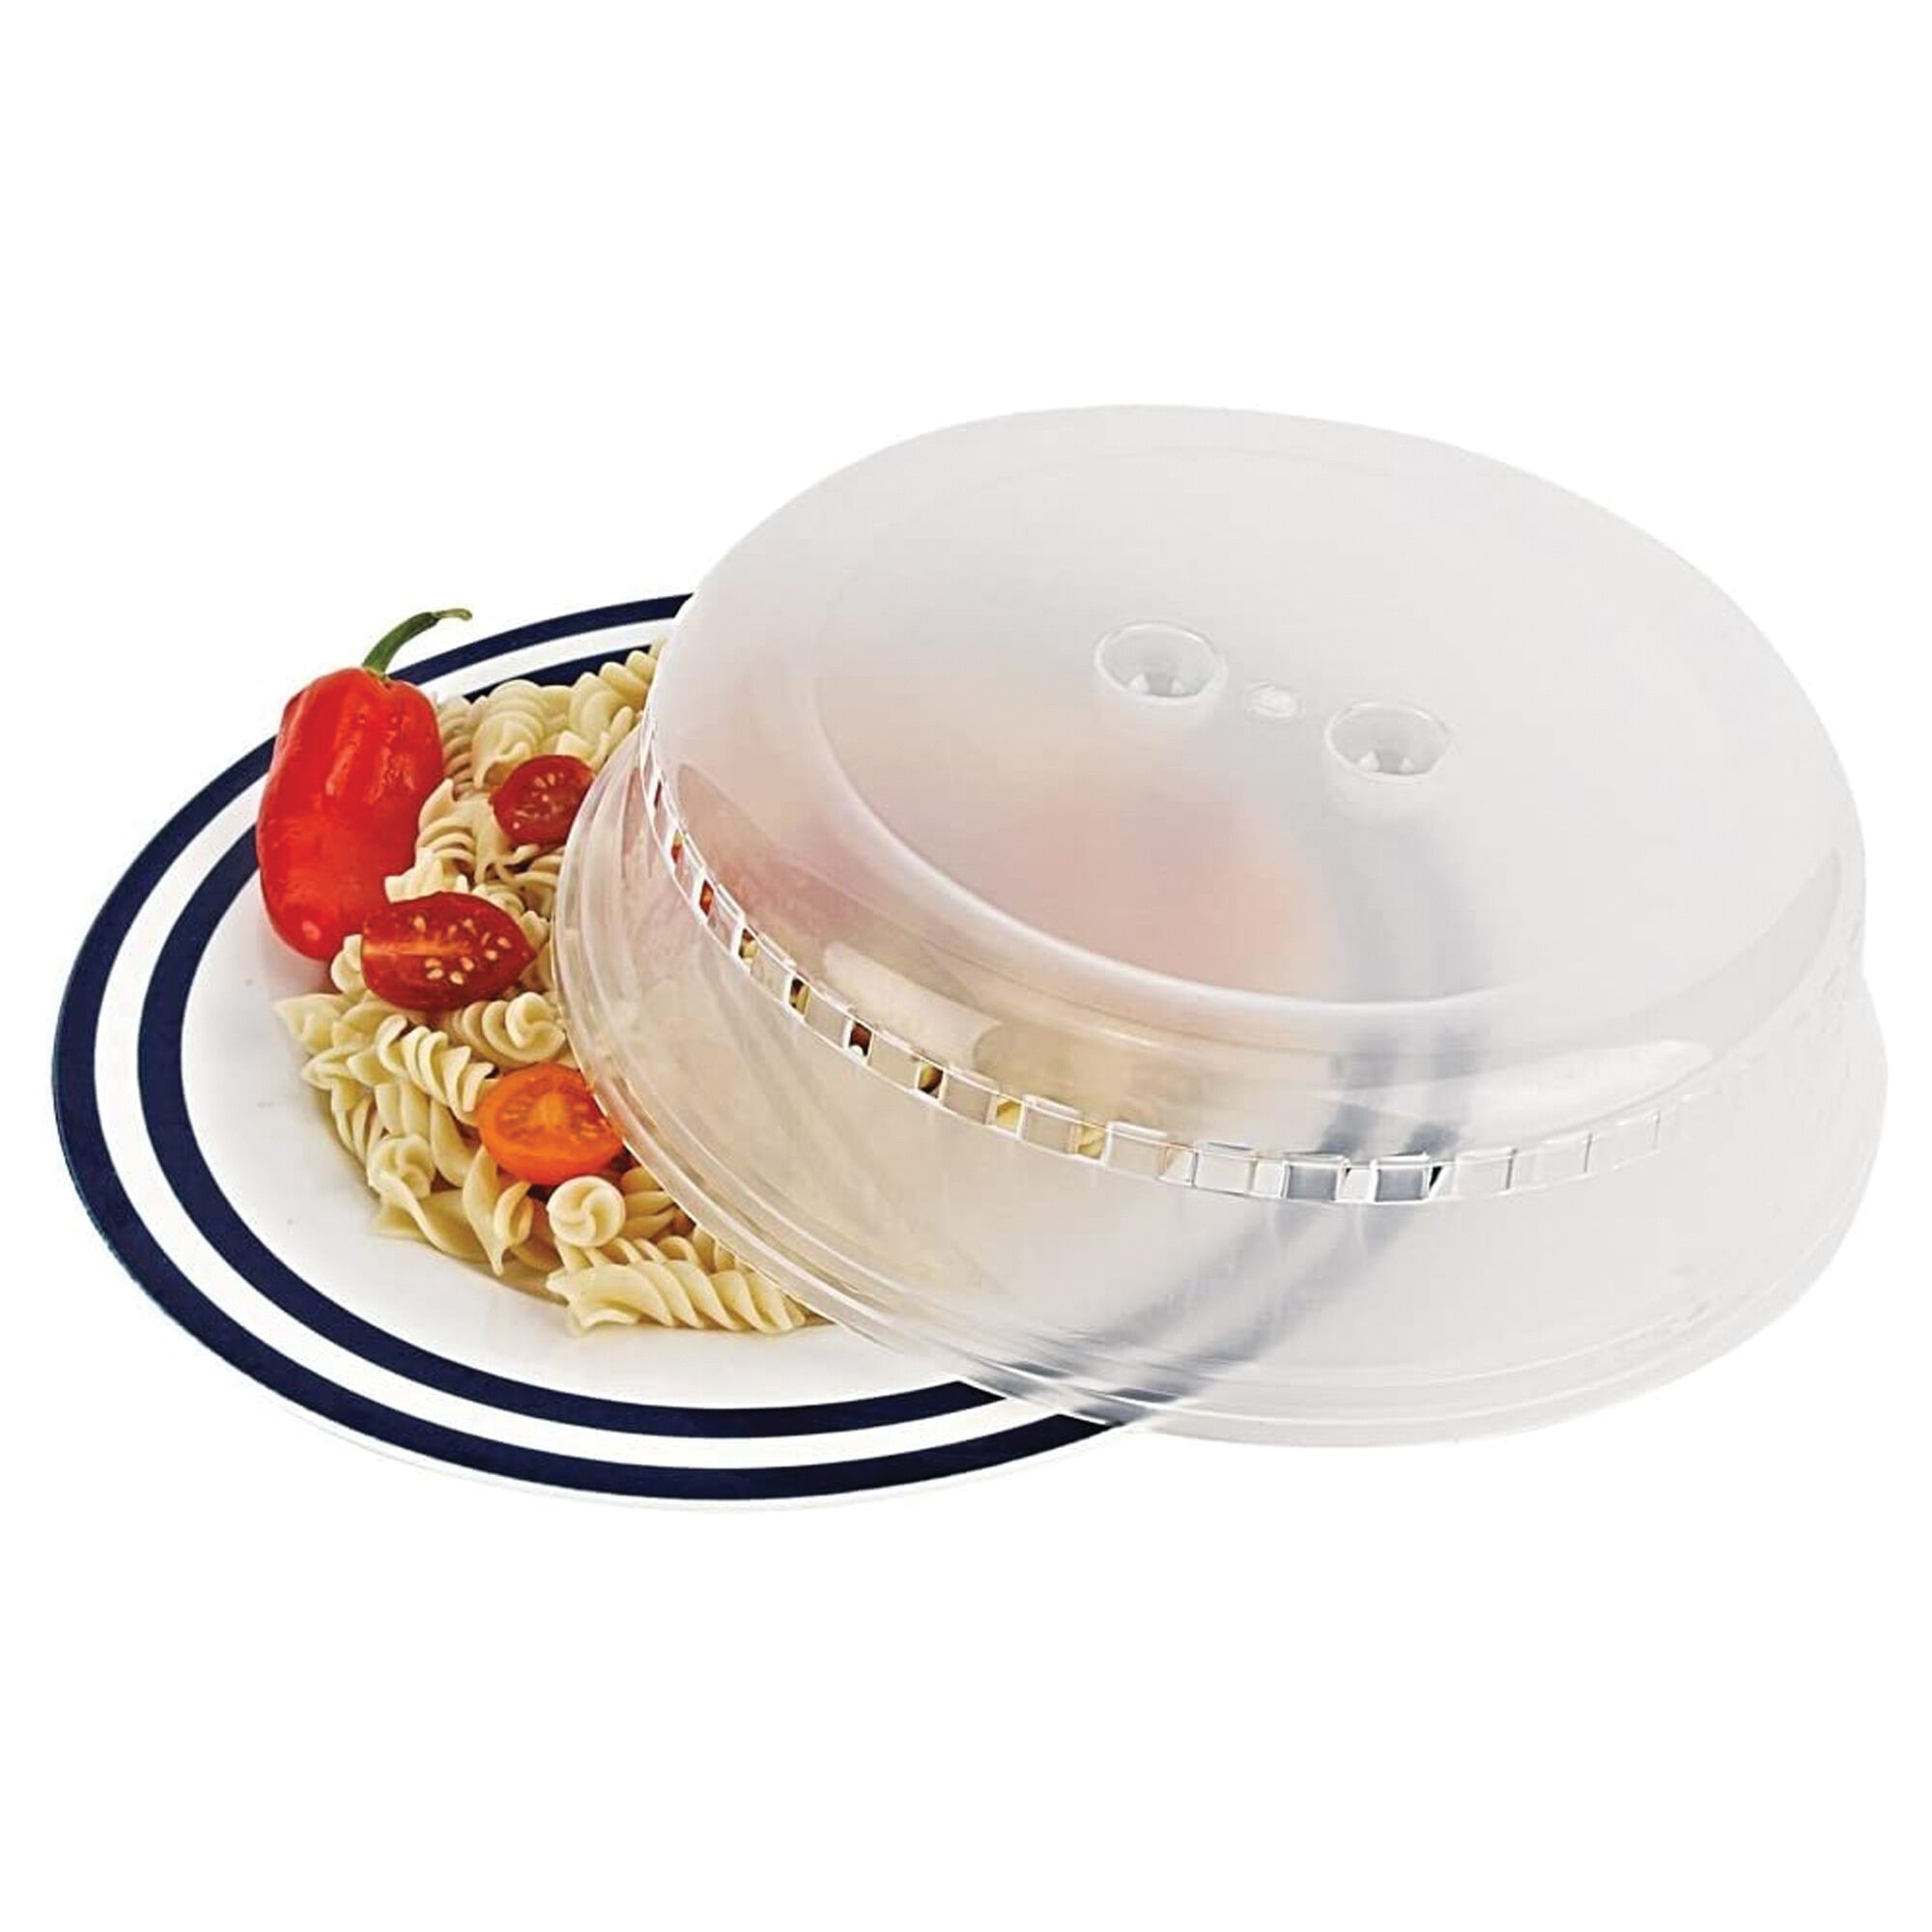 Better Houseware Universal Microwave Food Cover (Clear) in the